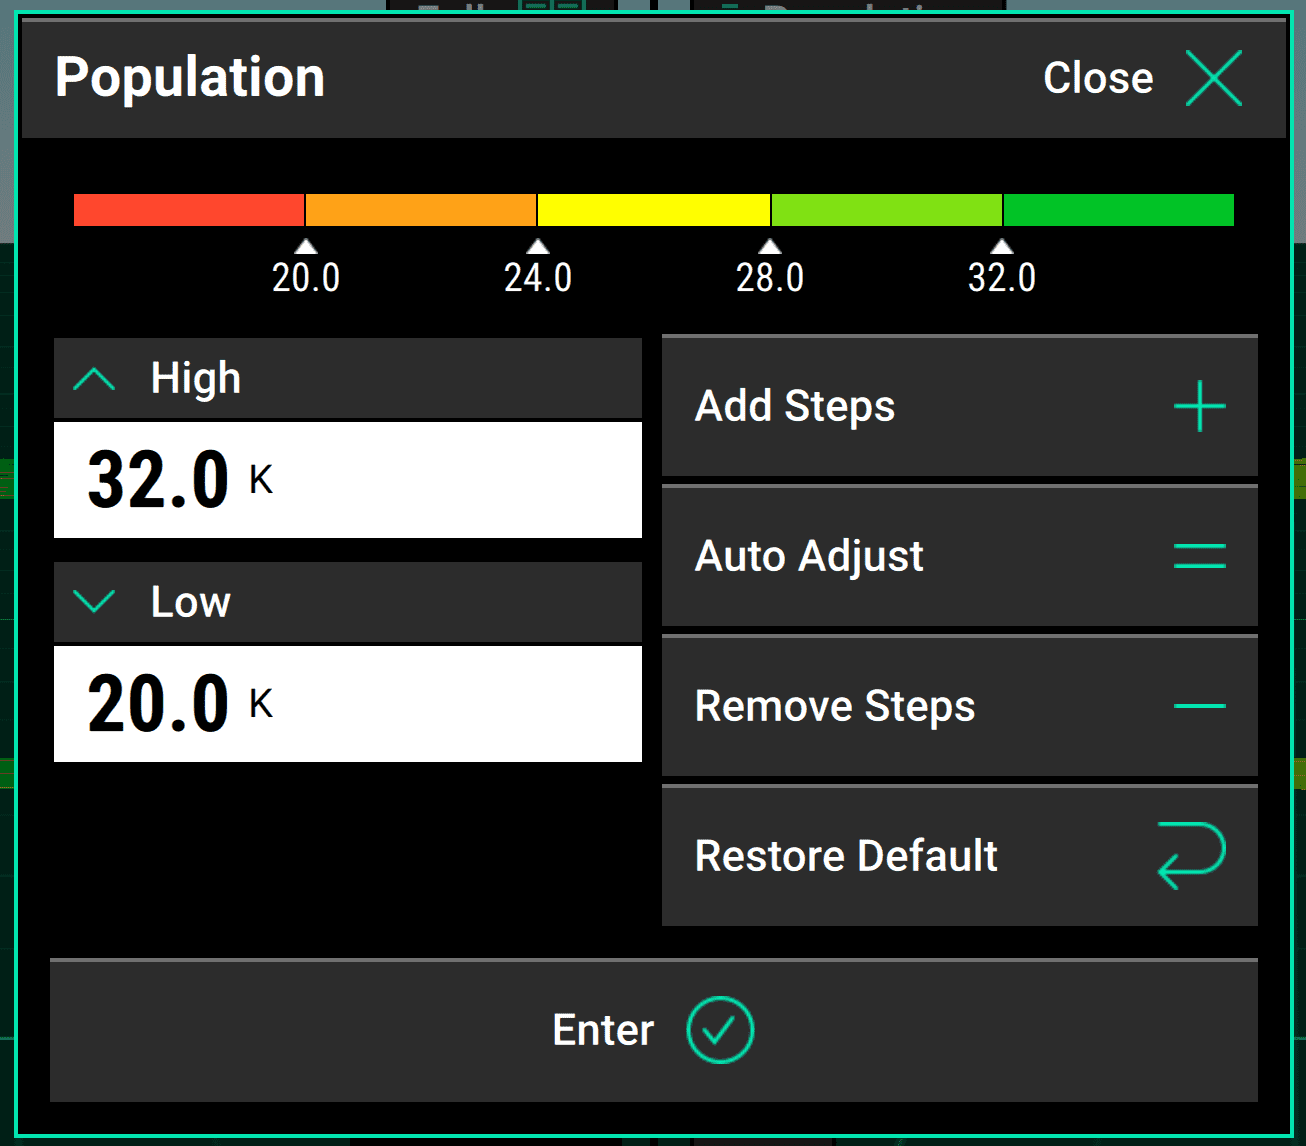 The legend adjustment popup lets you change the values represented in the metrics layer of the map.